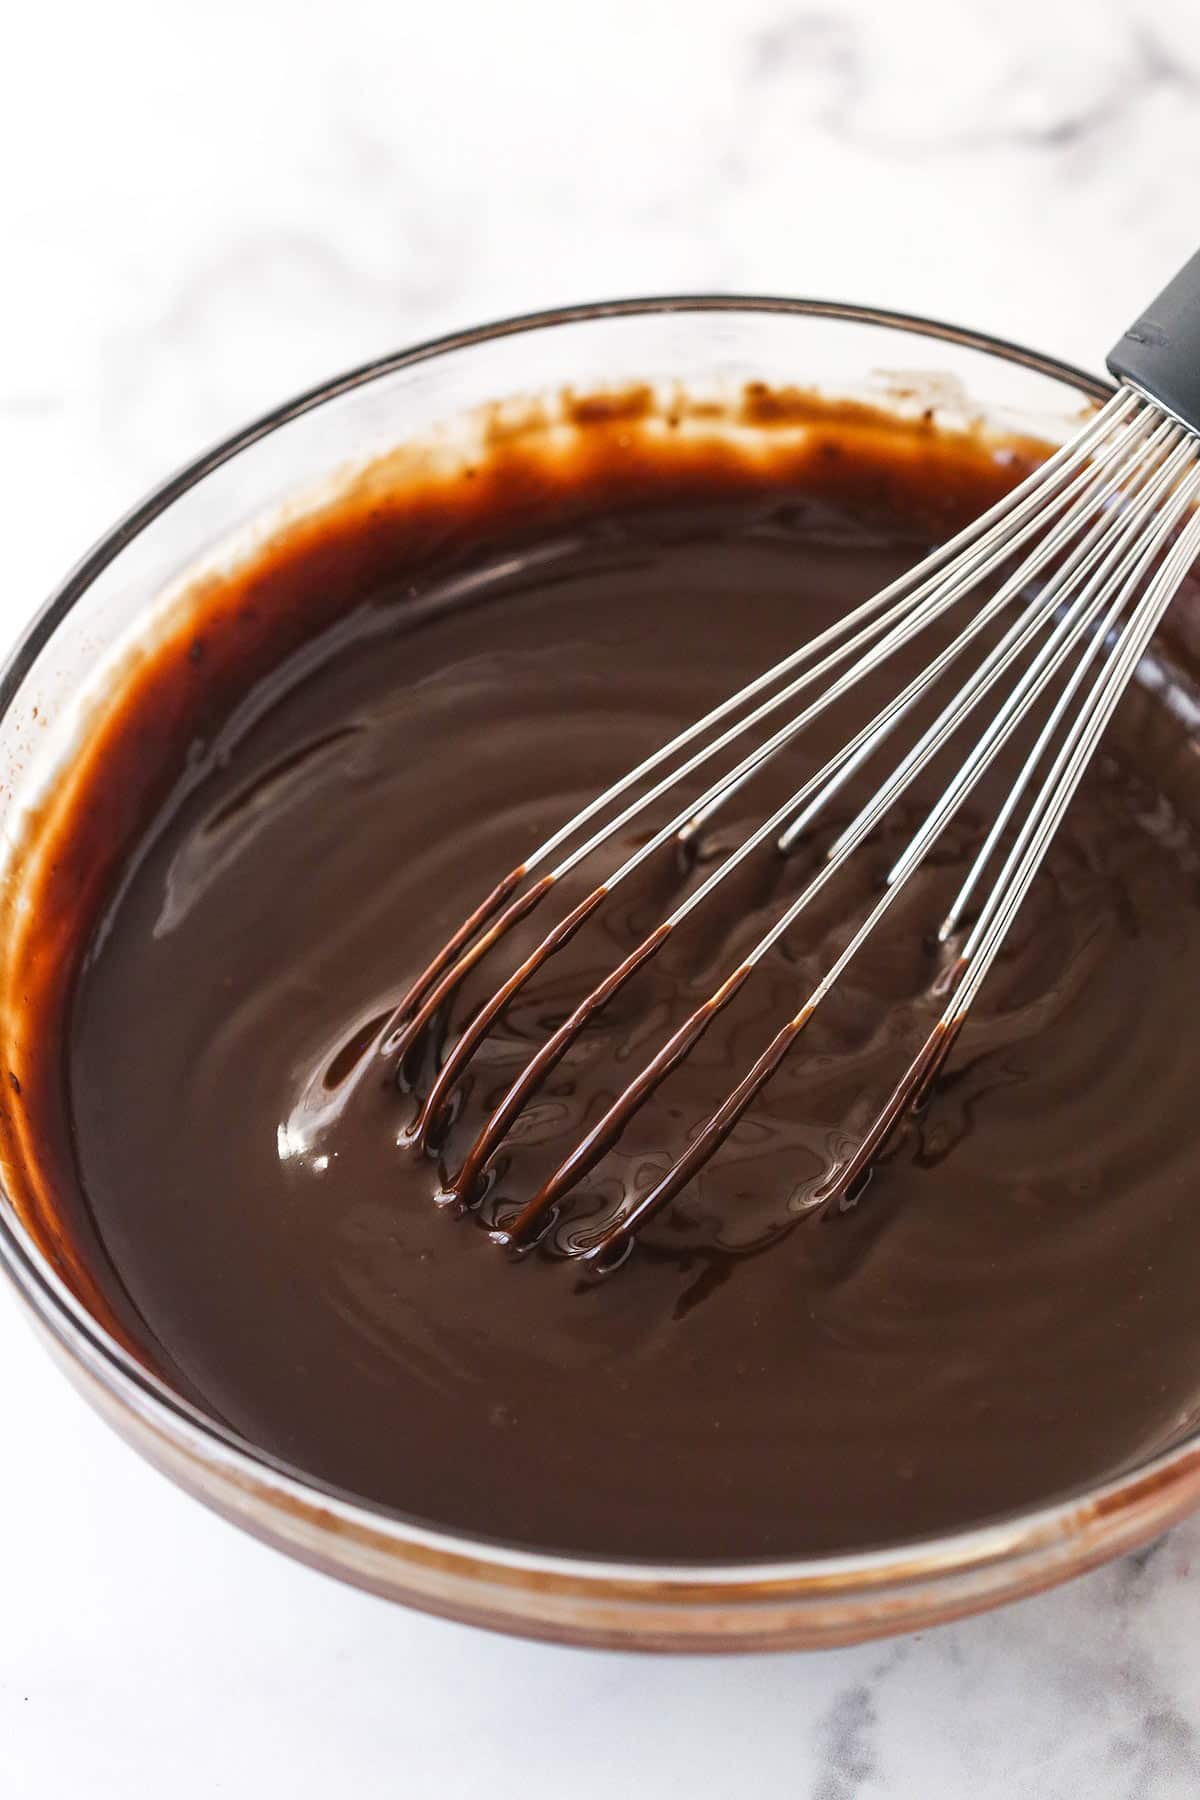 whisking together melted chocolate chips and heavy cream to make chocolate ganache.